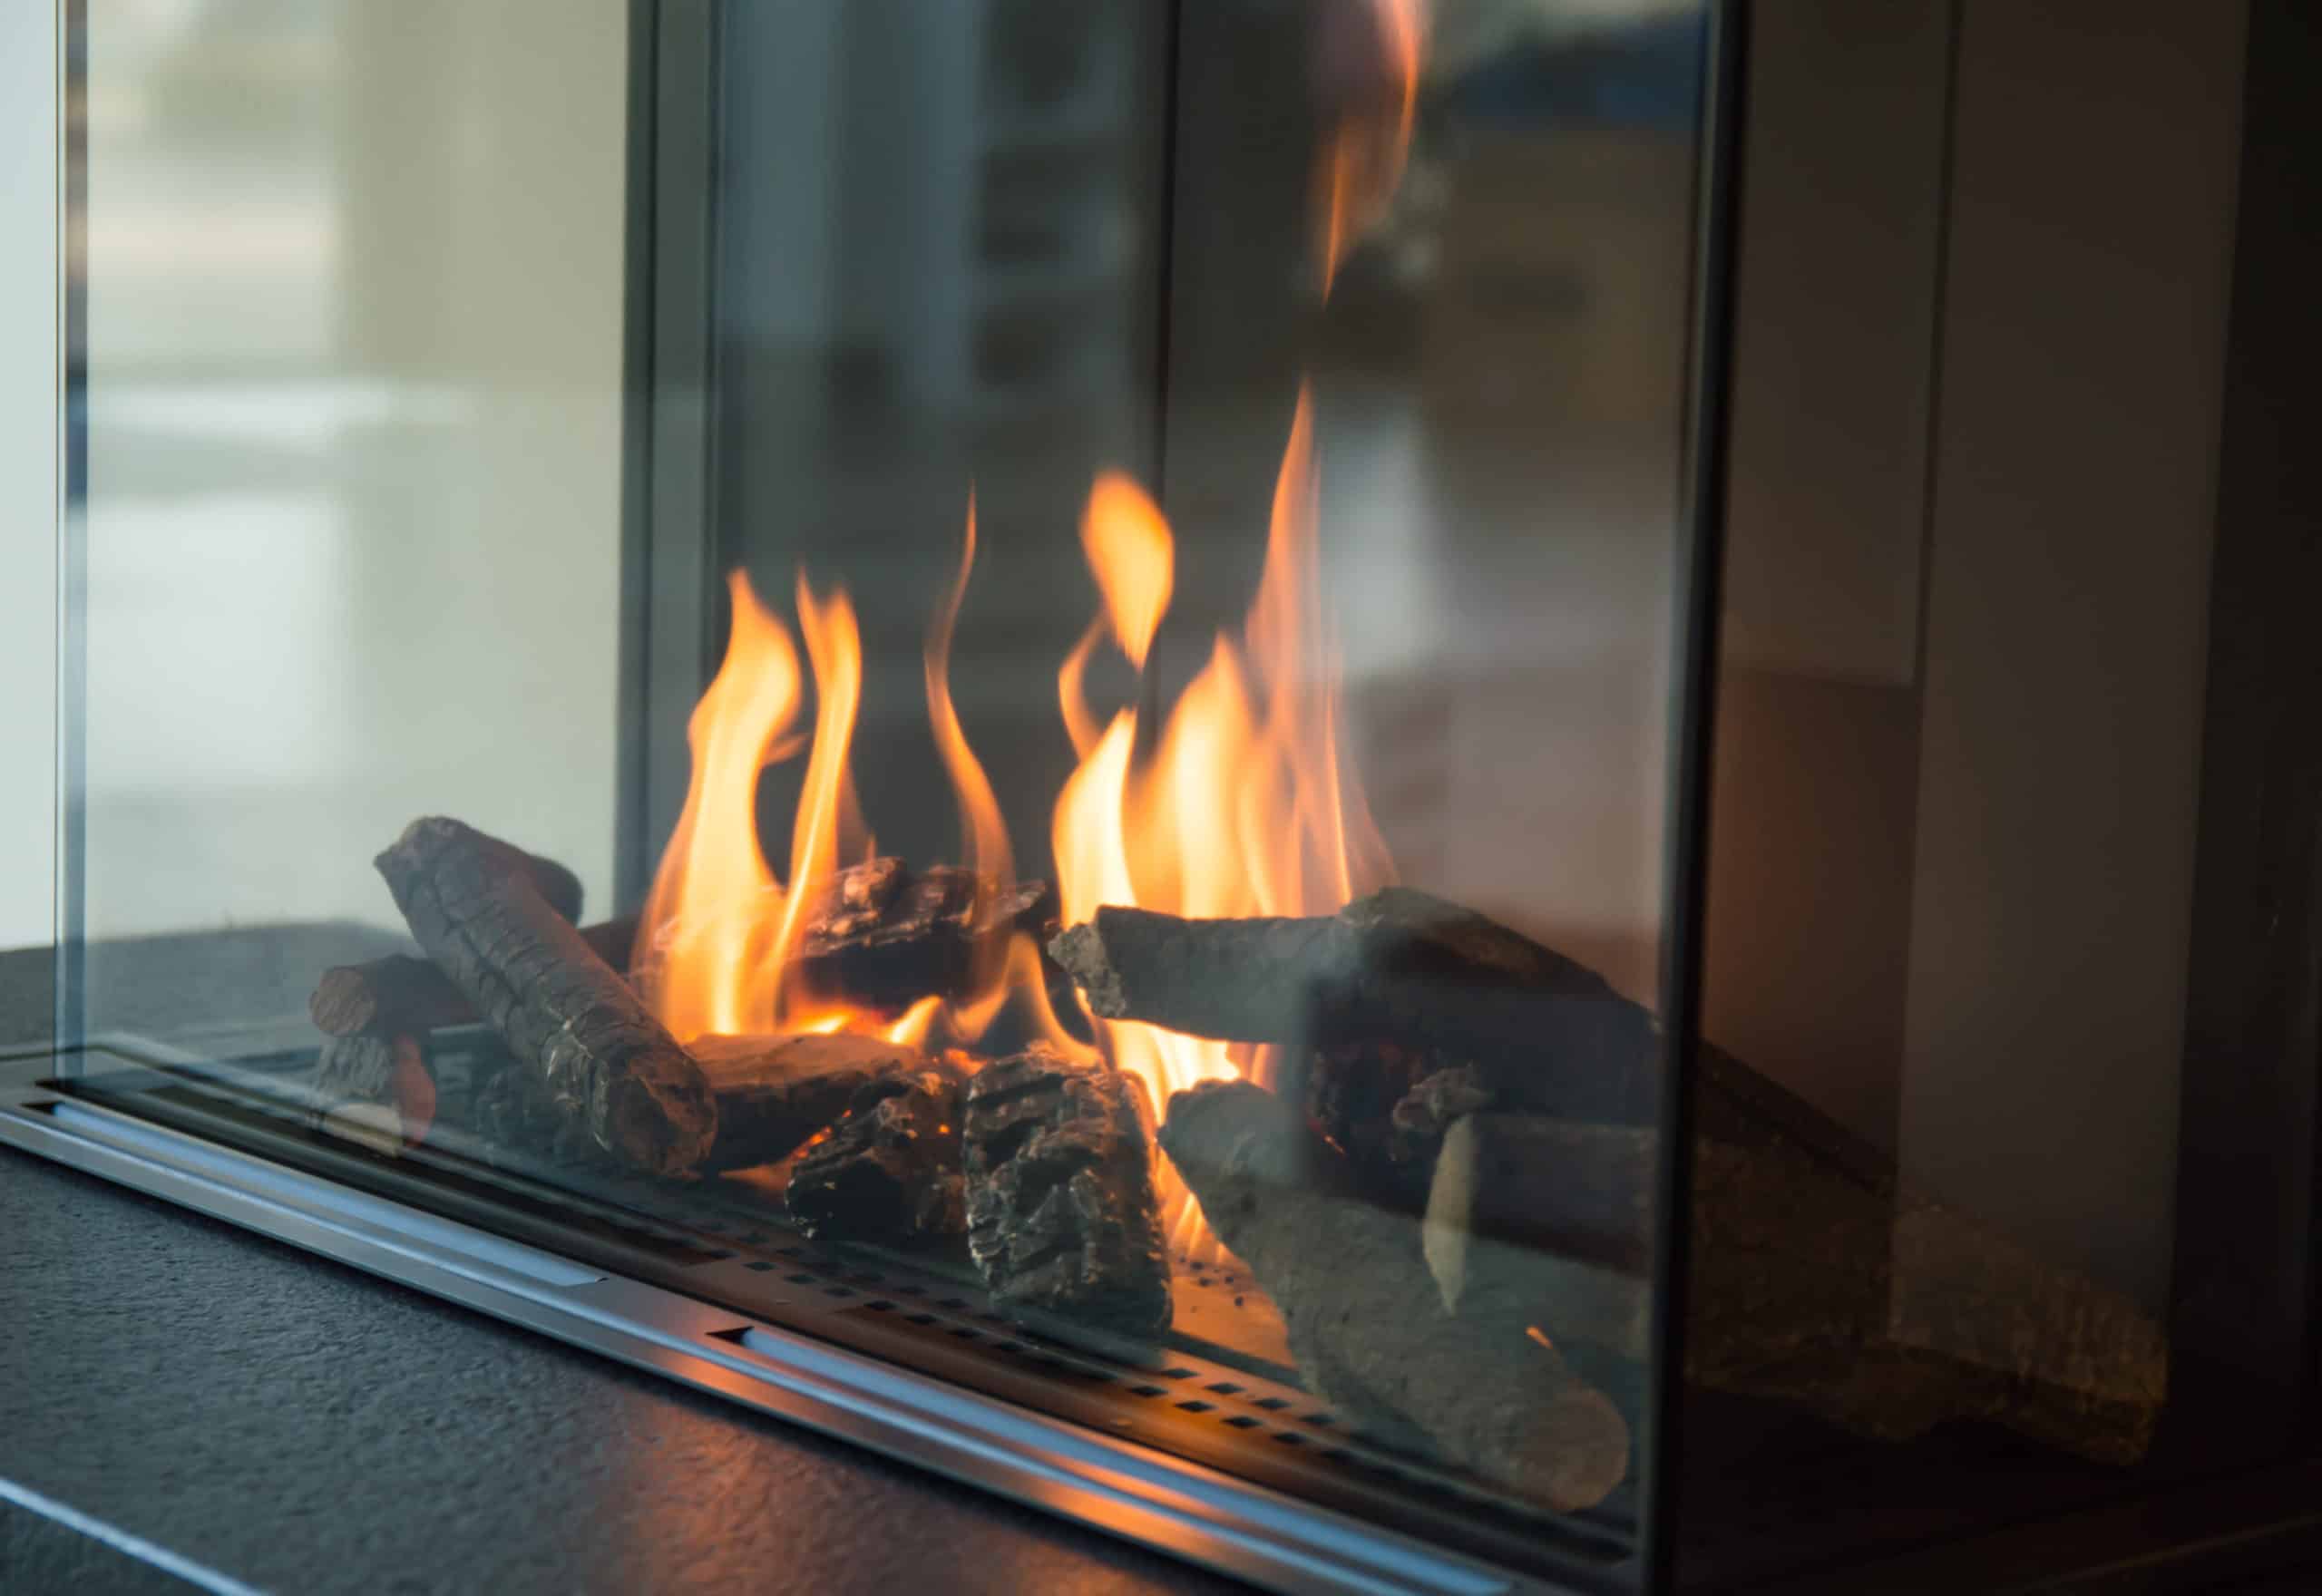 Safety Requirement for Glass Front Fireplace | Check Yours